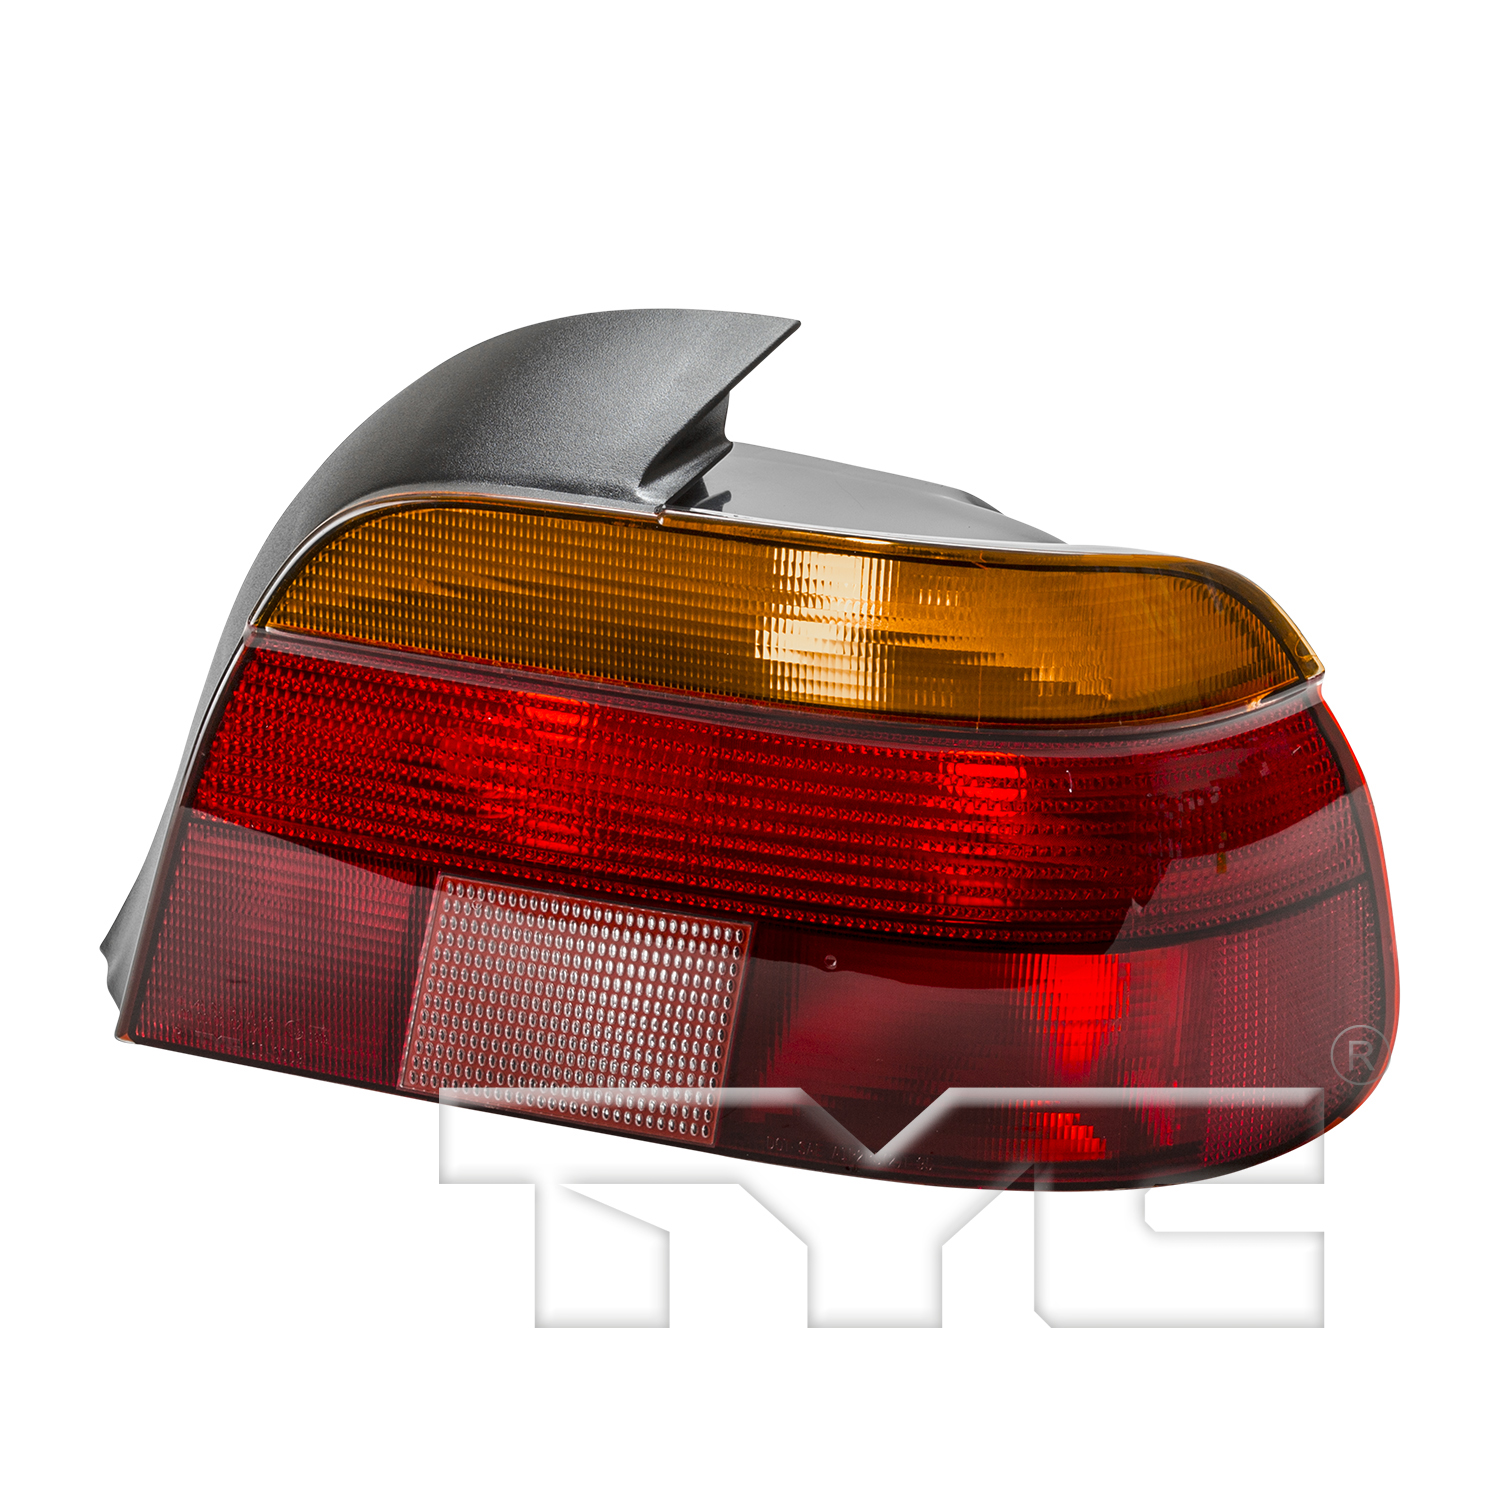 Aftermarket TAILLIGHTS for BMW - 540I, 540i,97-00,RT Taillamp assy